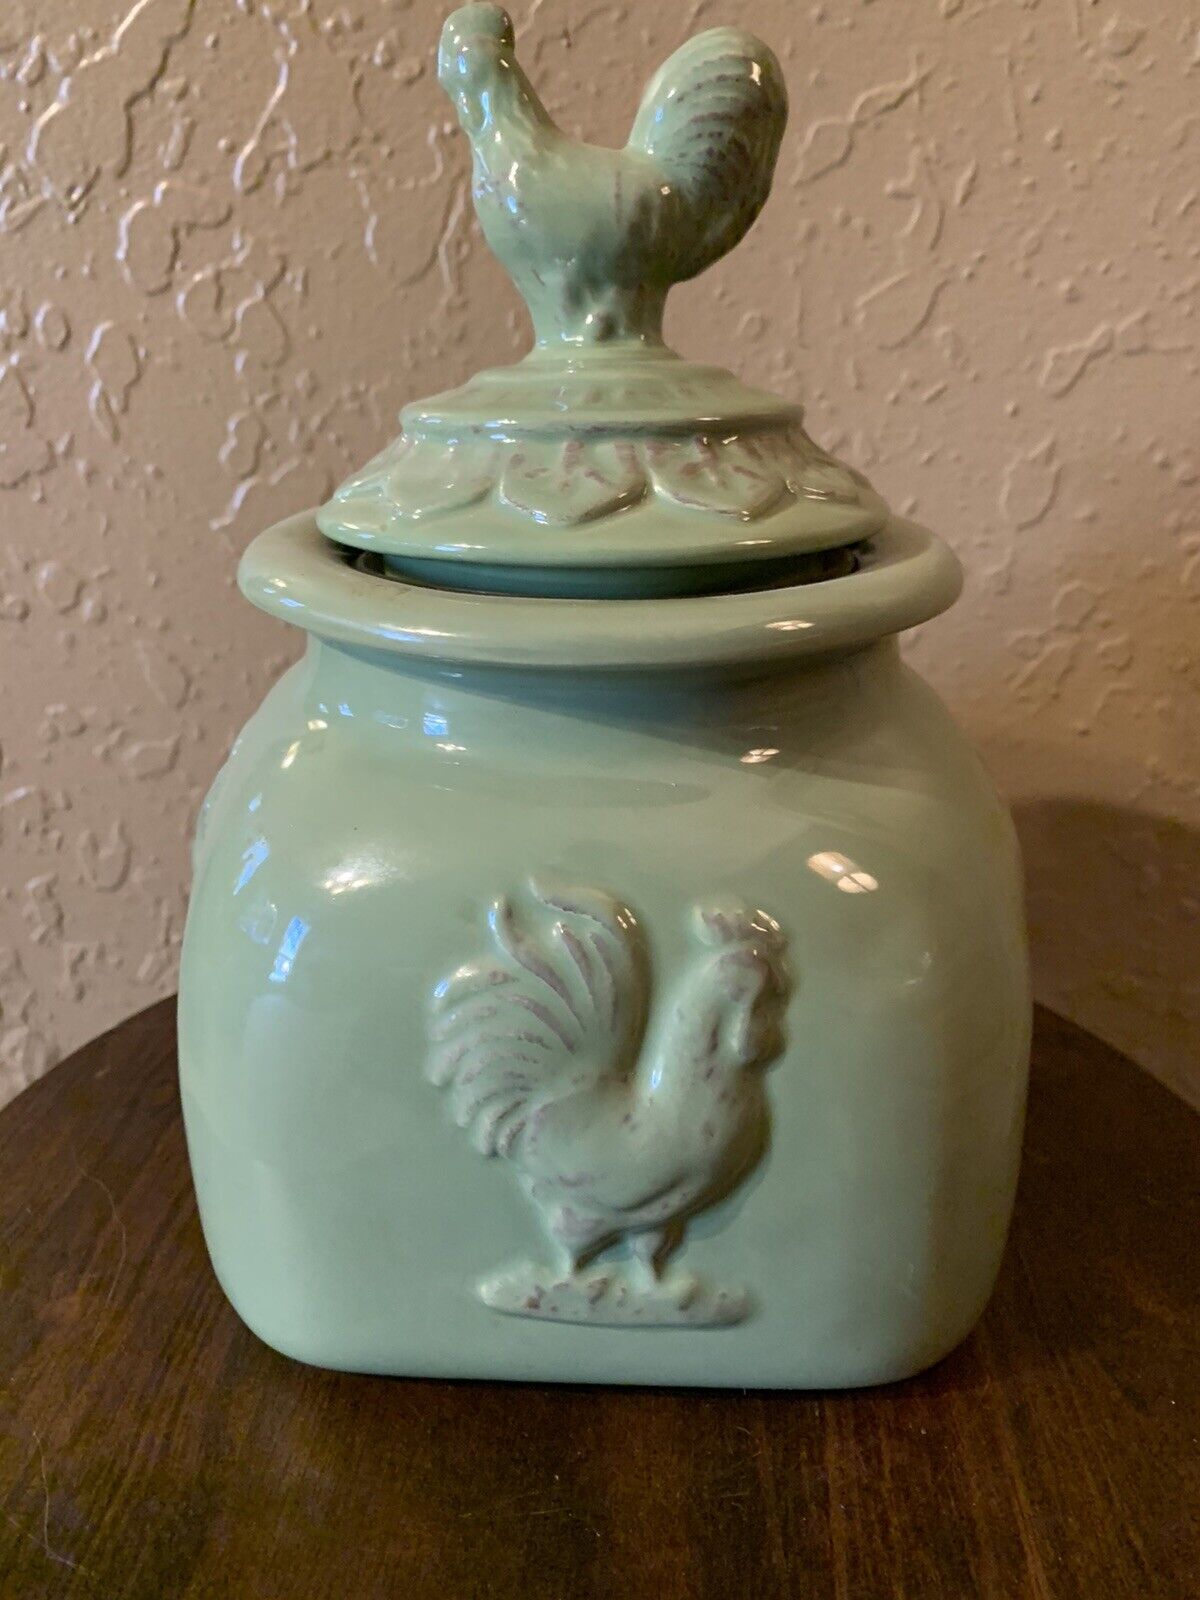 Vintage Green Ceramic Cookie Jar W/Roosters & Lid with a seal. Used. No chips